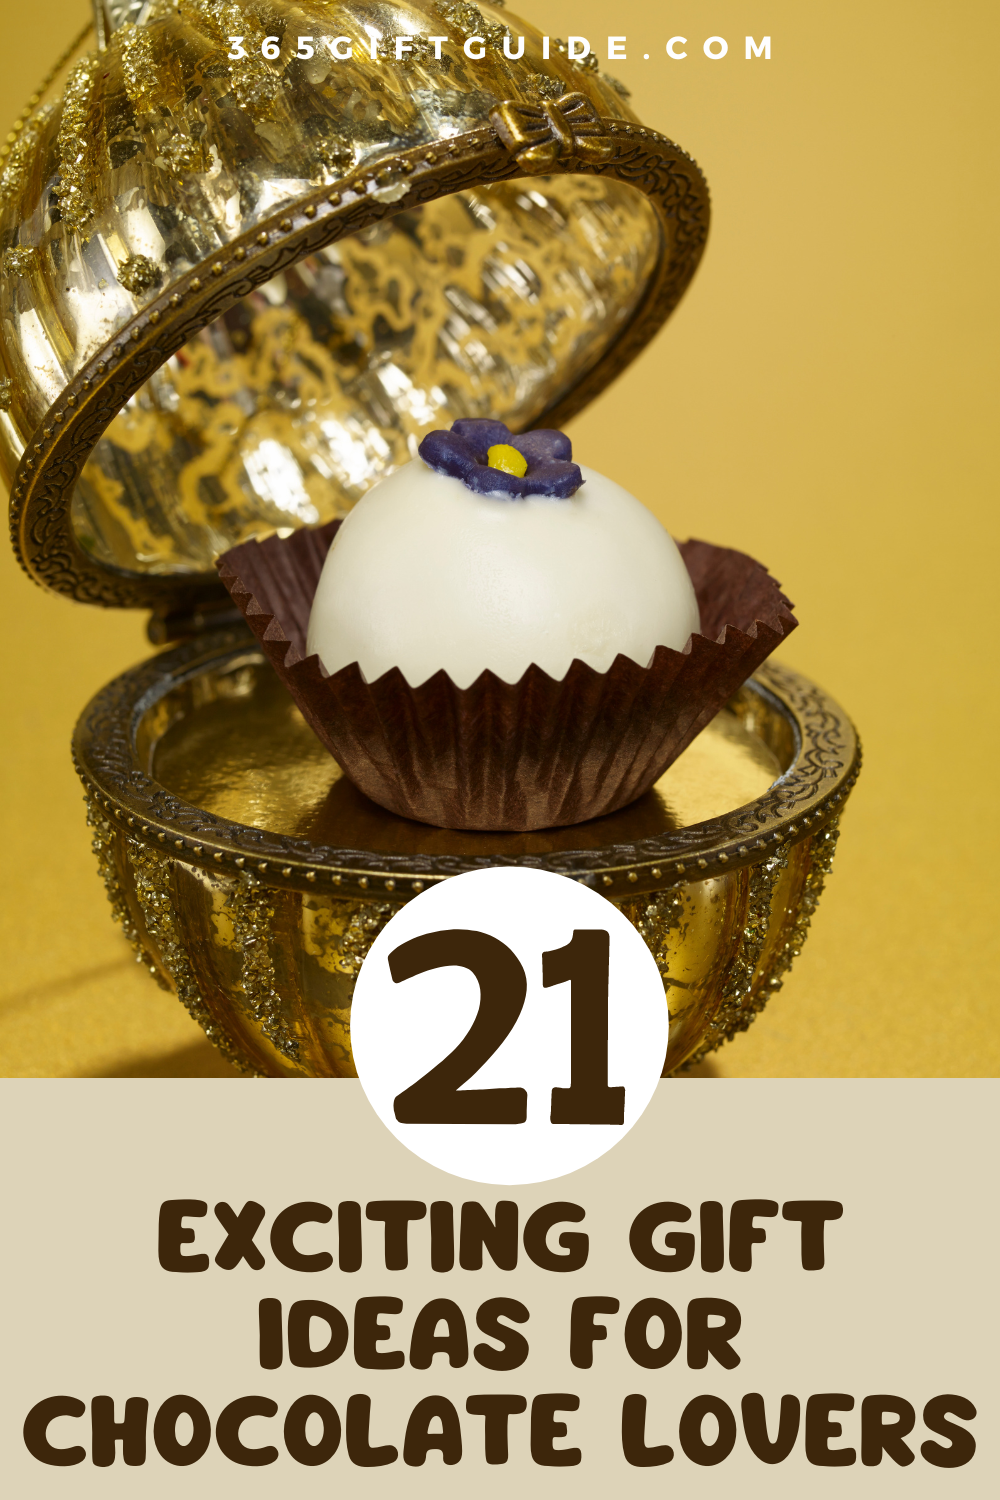 21 Exciting Gift Ideas for Chocolate Lovers